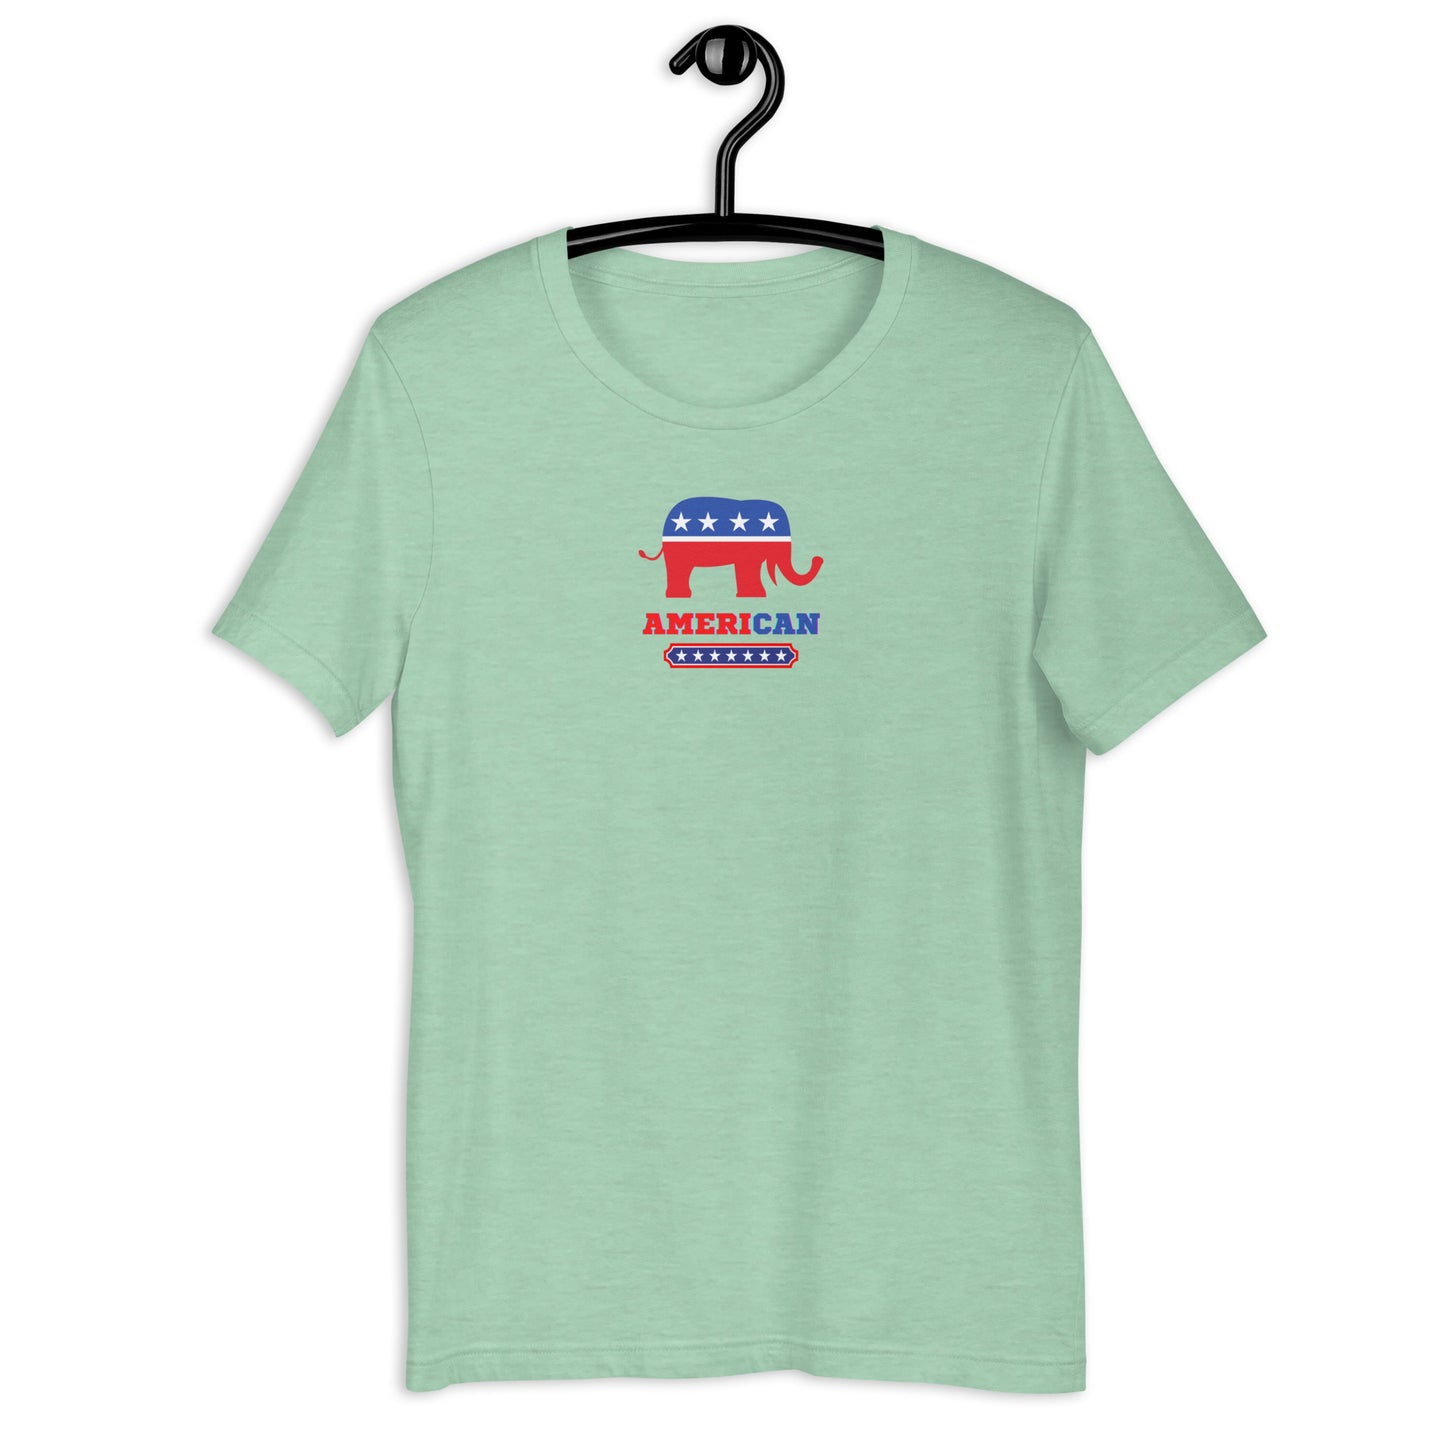 AMERICAN UNISEX T–SHIRT "ELEPHANT" PRISM MINT FRONT - www.firstamericanstore.com